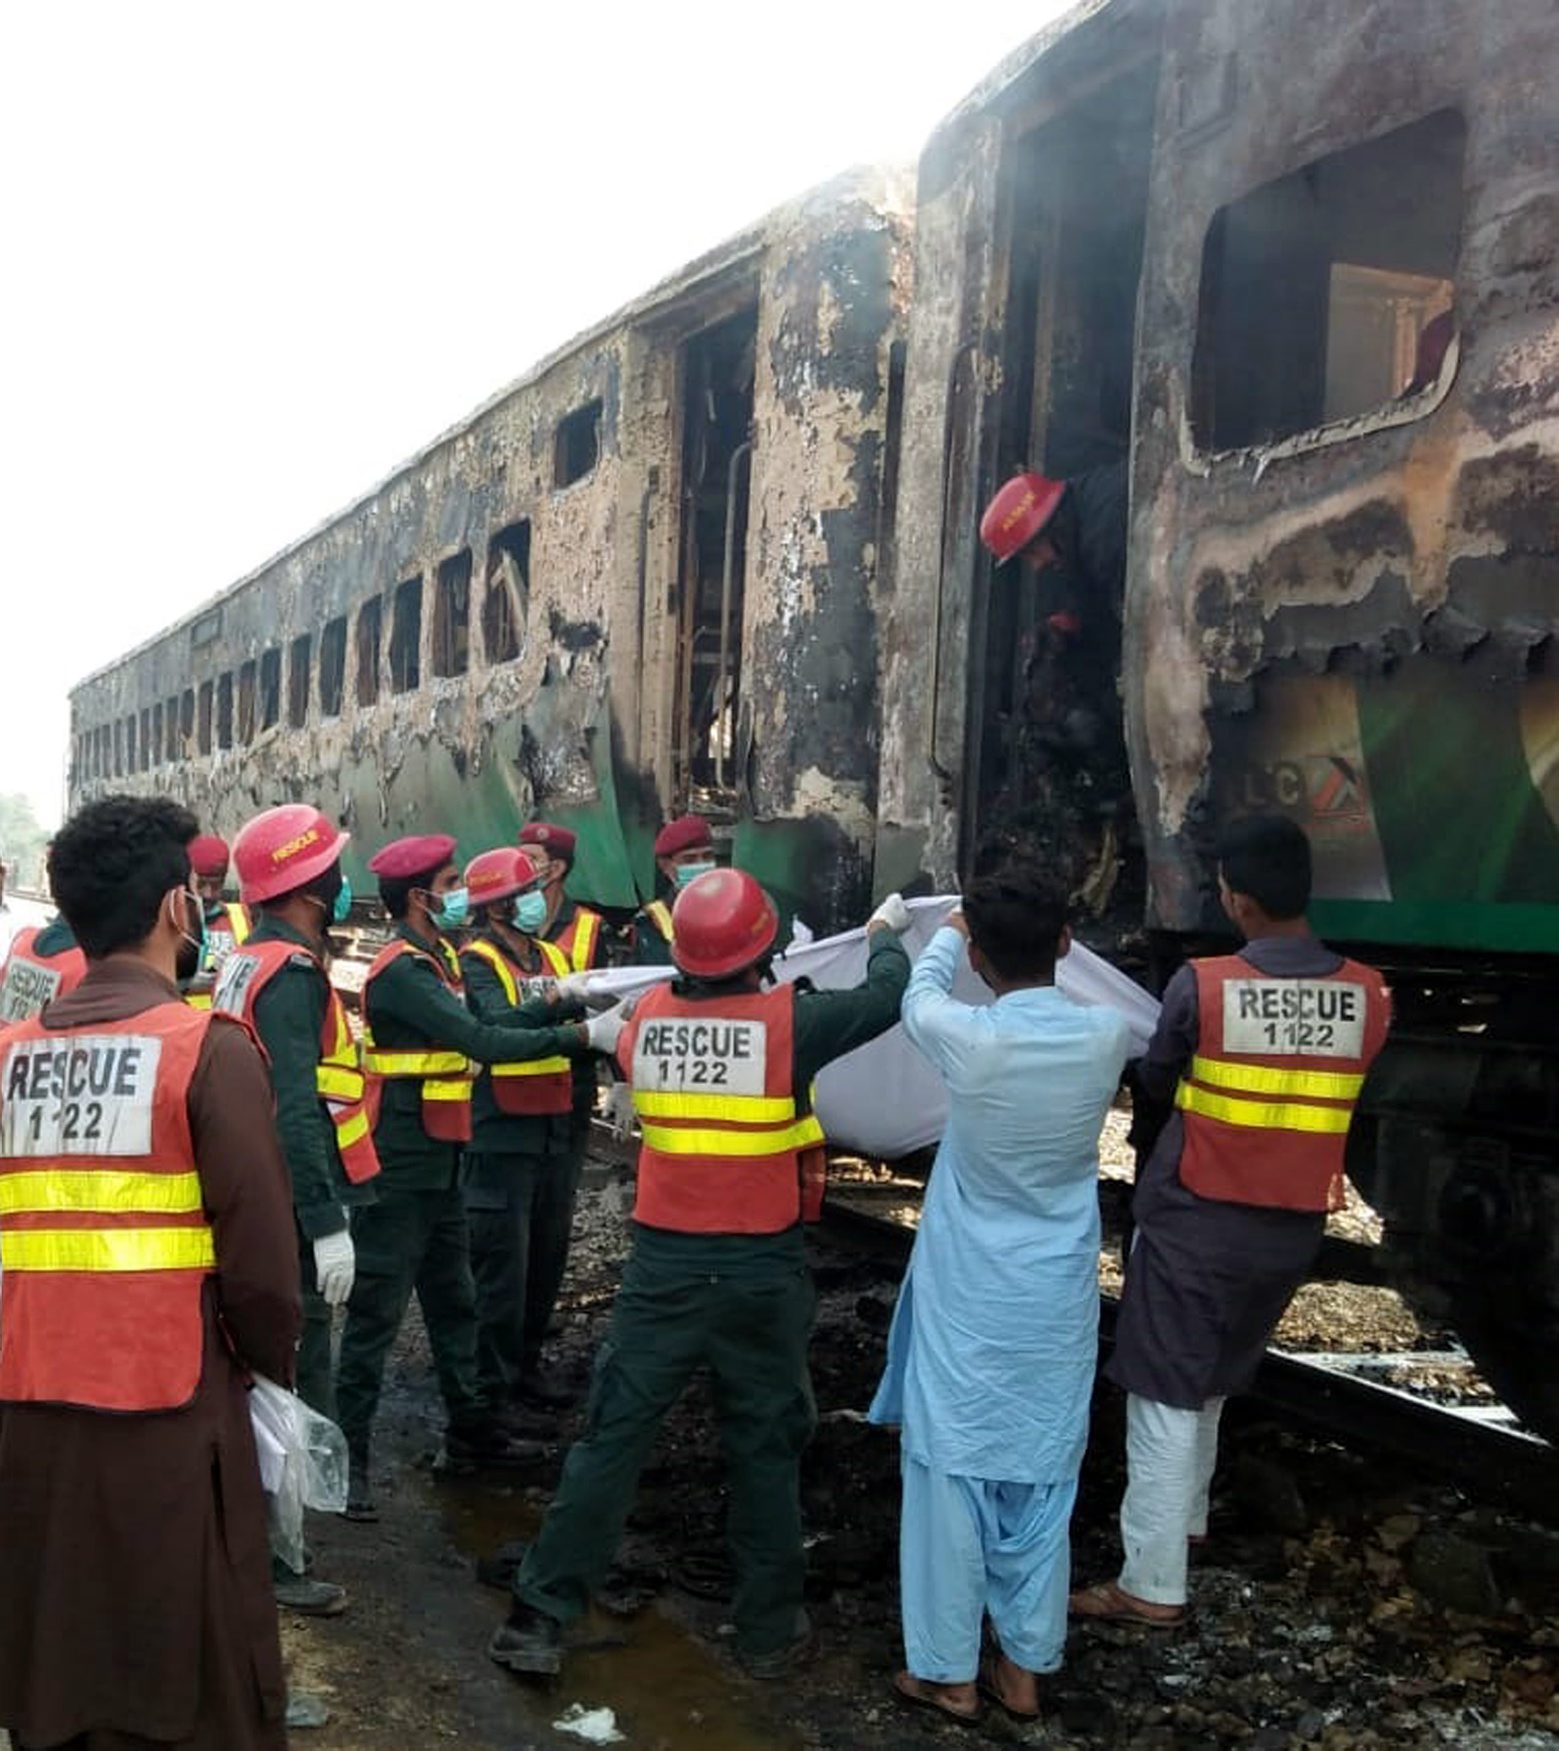 epa07961657 Rescue workers shift the bodies of the victims after a fire engulfed a passenger train near Rahim Yar Khan, Pakistan, 31 October 2019. Dozens were killed and more than 40 others injured after a fire erupted from a gas canister blast engulfed a train completely destroying at least three coaches.  EPA/STRINGER ATTENTION: GRAPHIC CONTENT PAKISTAN FIRE TRANSPORT ACCIDENT